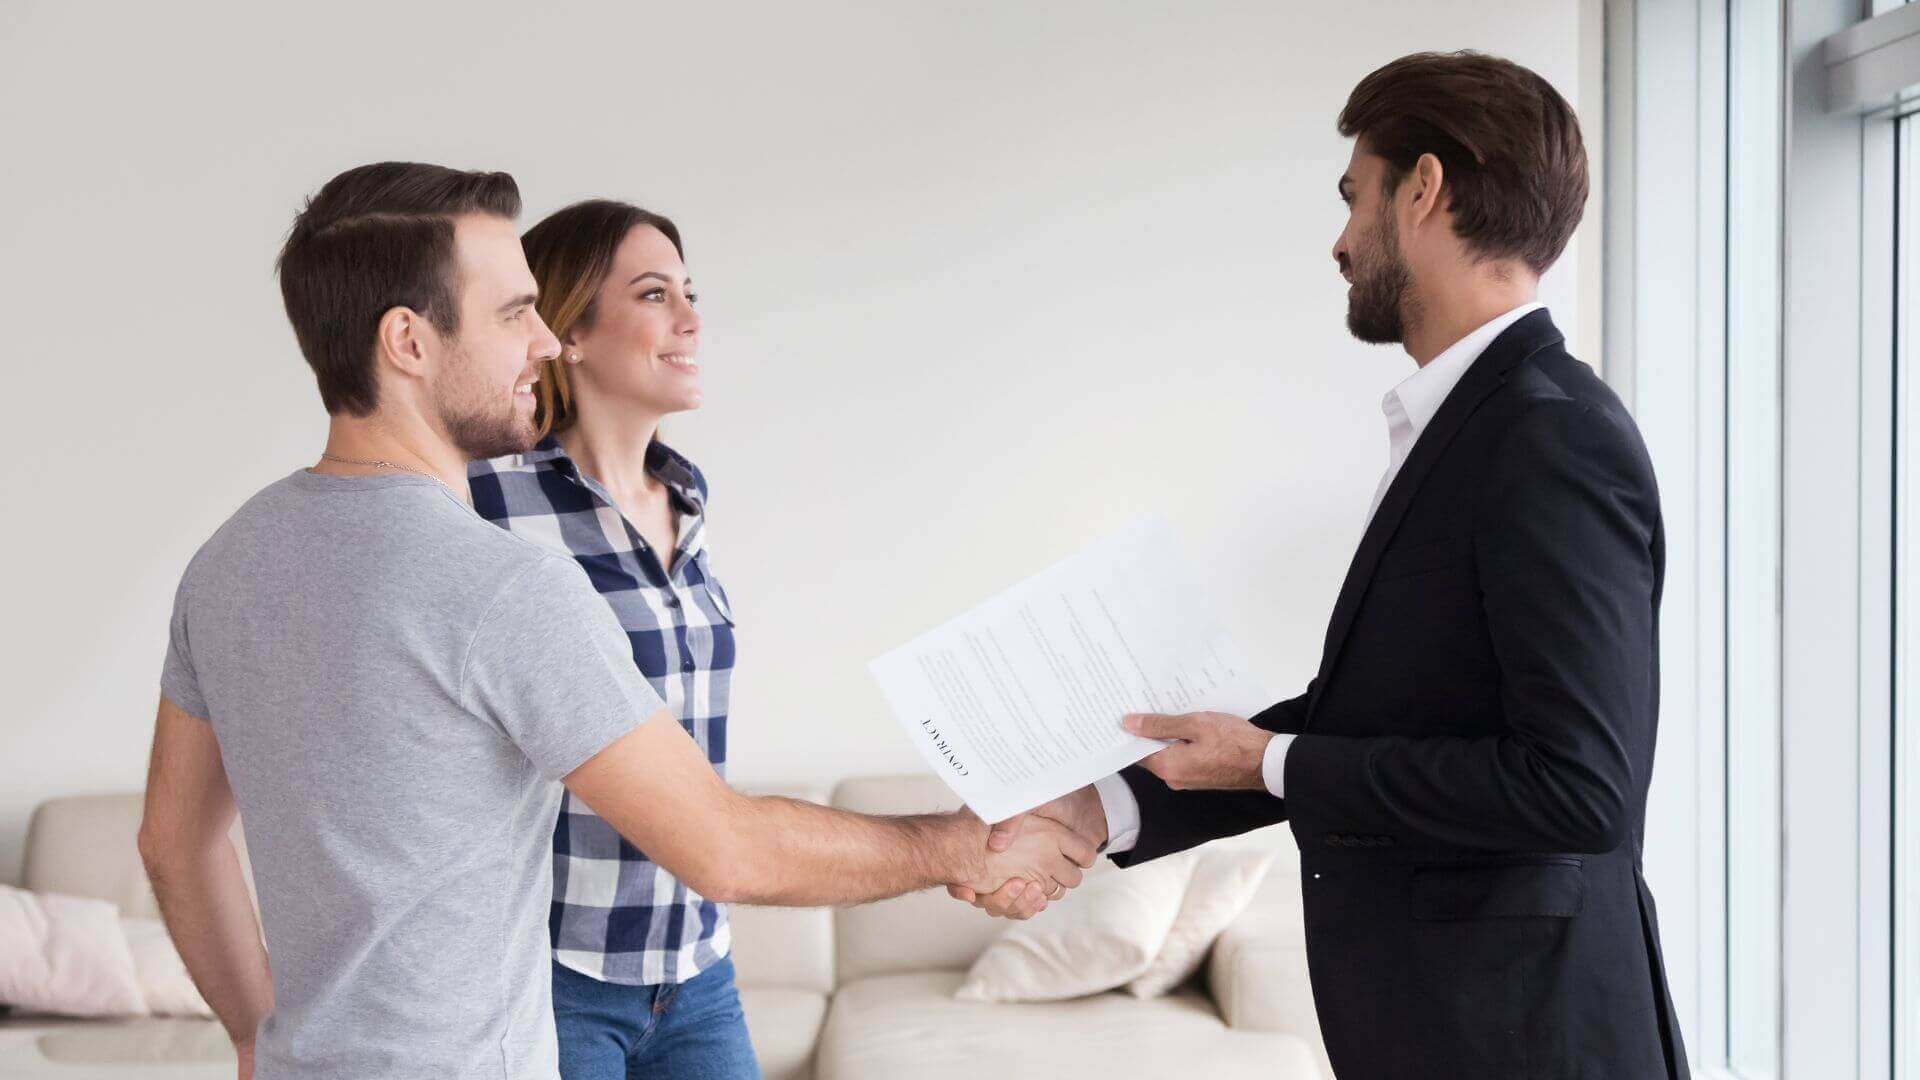 A landlord in a black suit with a beard holds a lease agreement while shaking hands with two new, smiling tenants.